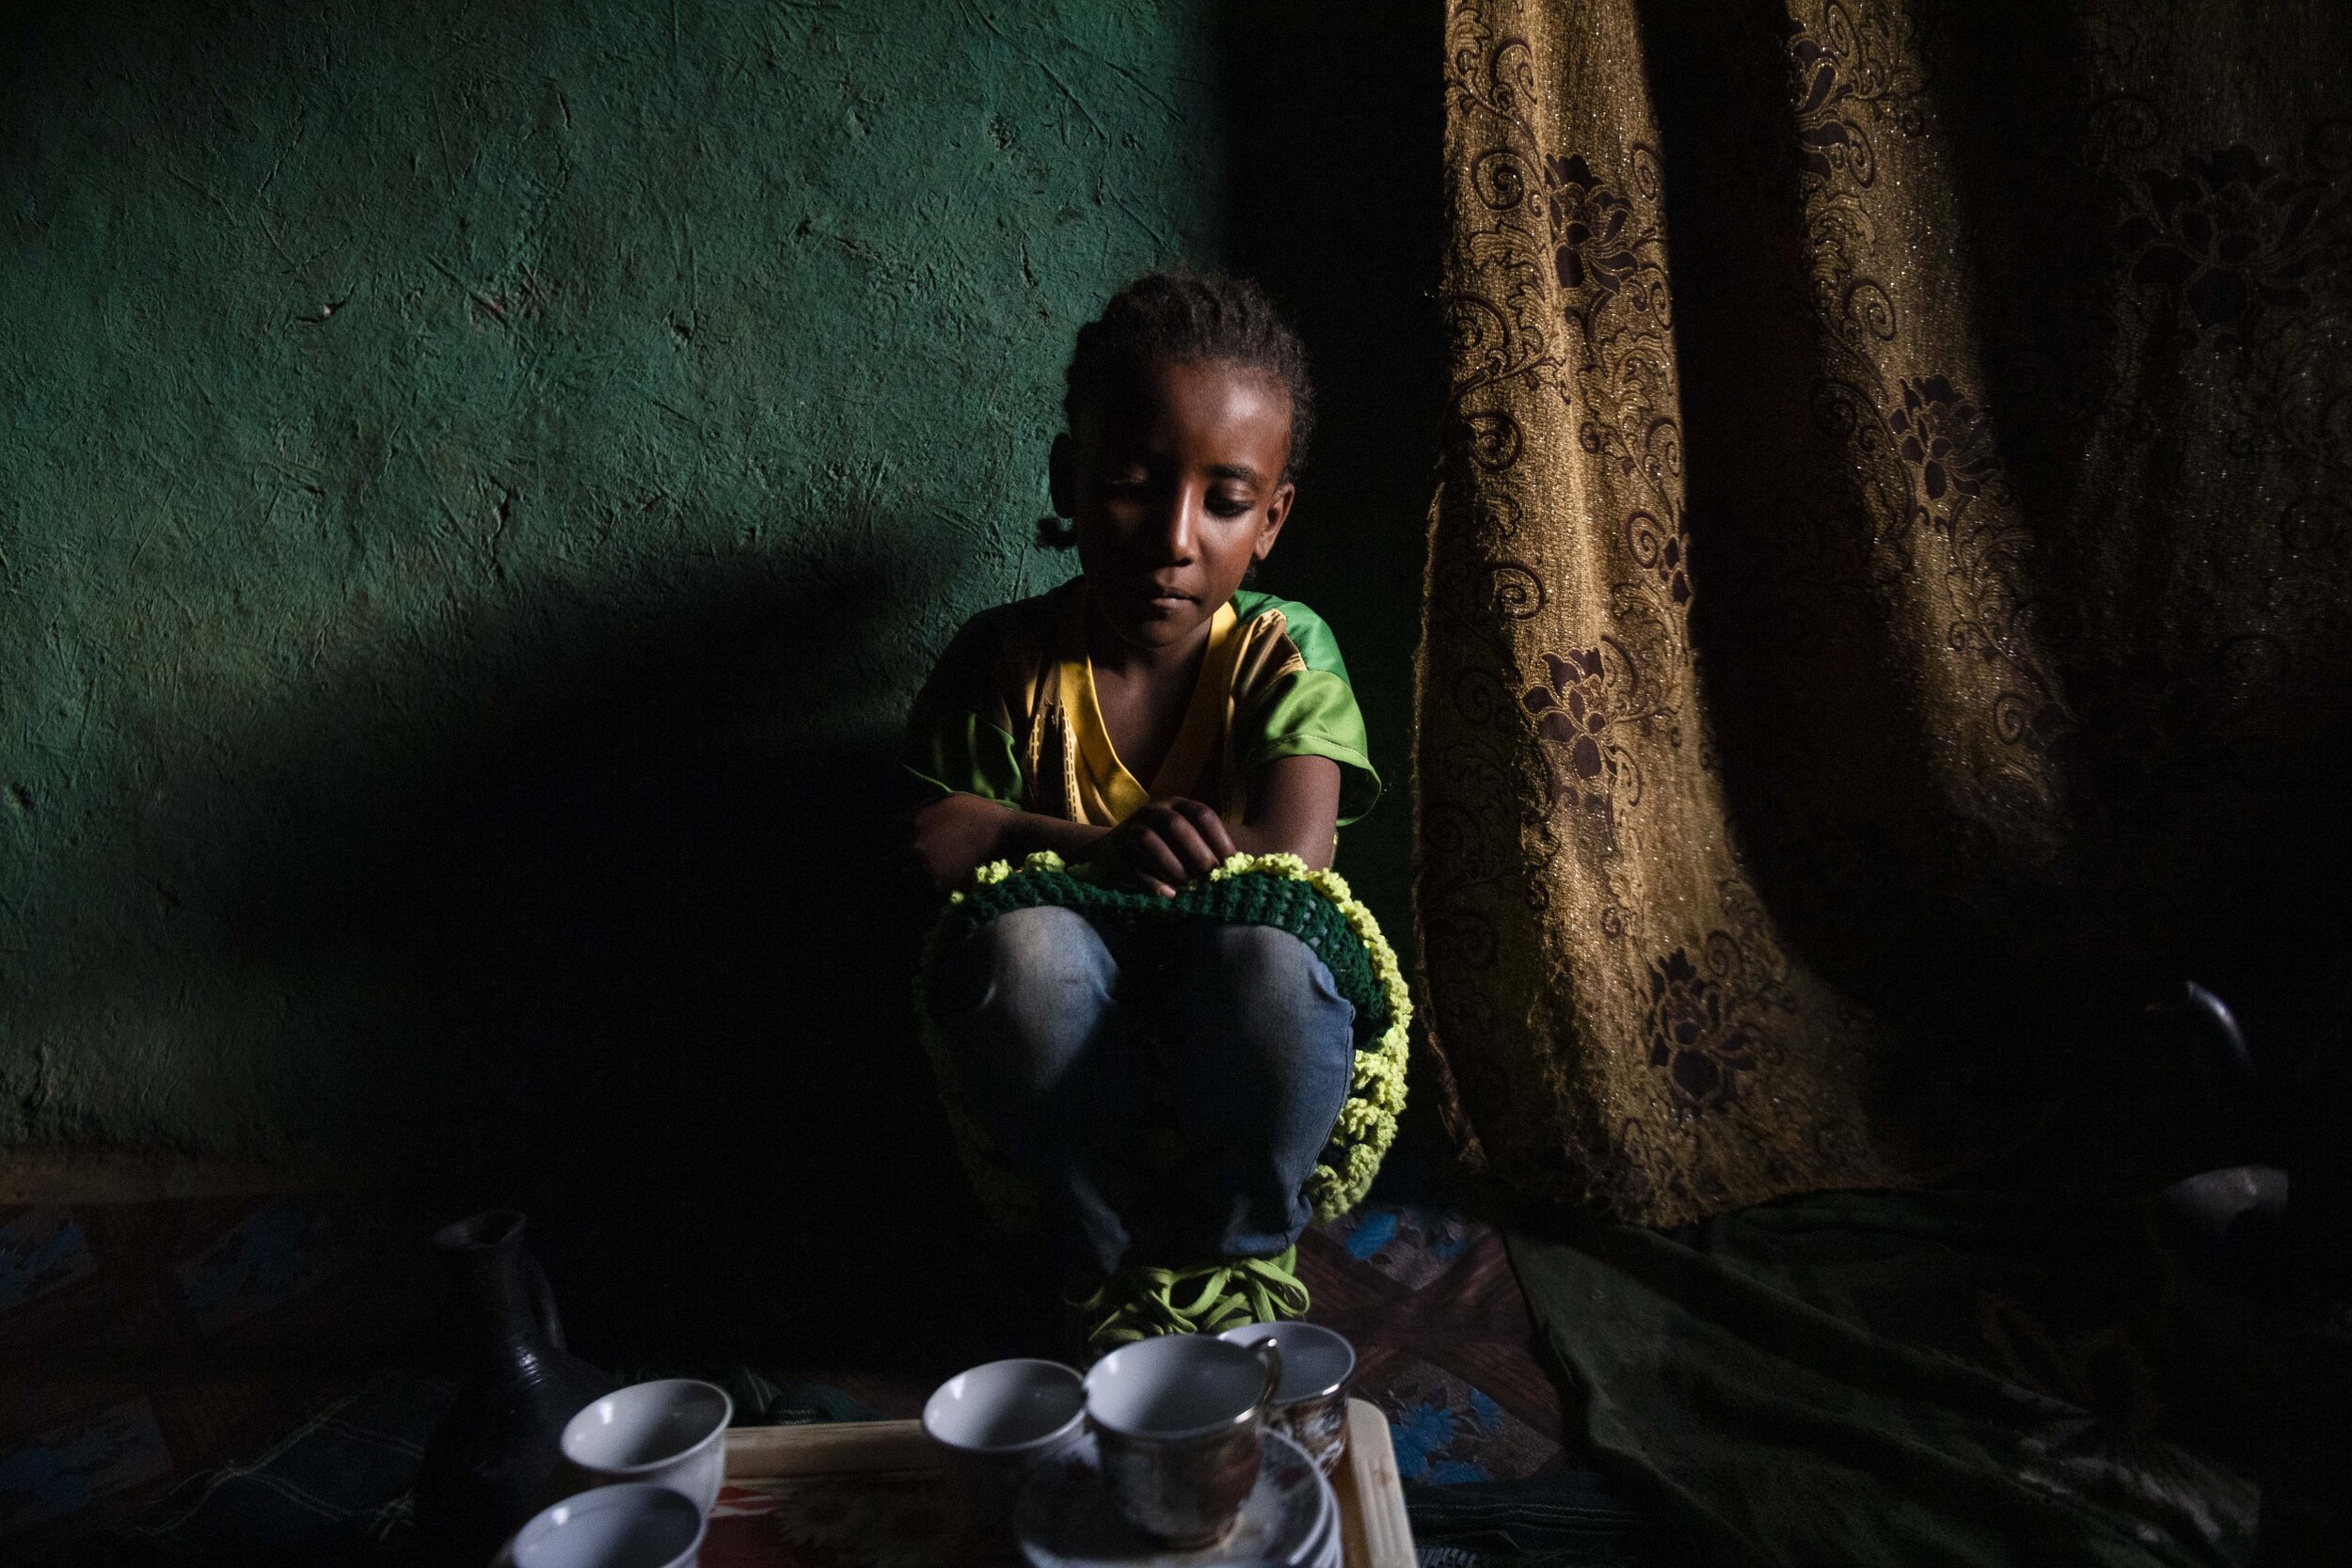  Asnaku Tufa’s youngest daughter helps prepare coffee.  As a child, Asnaku would watch as her mother epilated her lashes to relieve the pain from the Neglected Tropical Disease, Trachoma, which causes the turning in of eye lashes.  